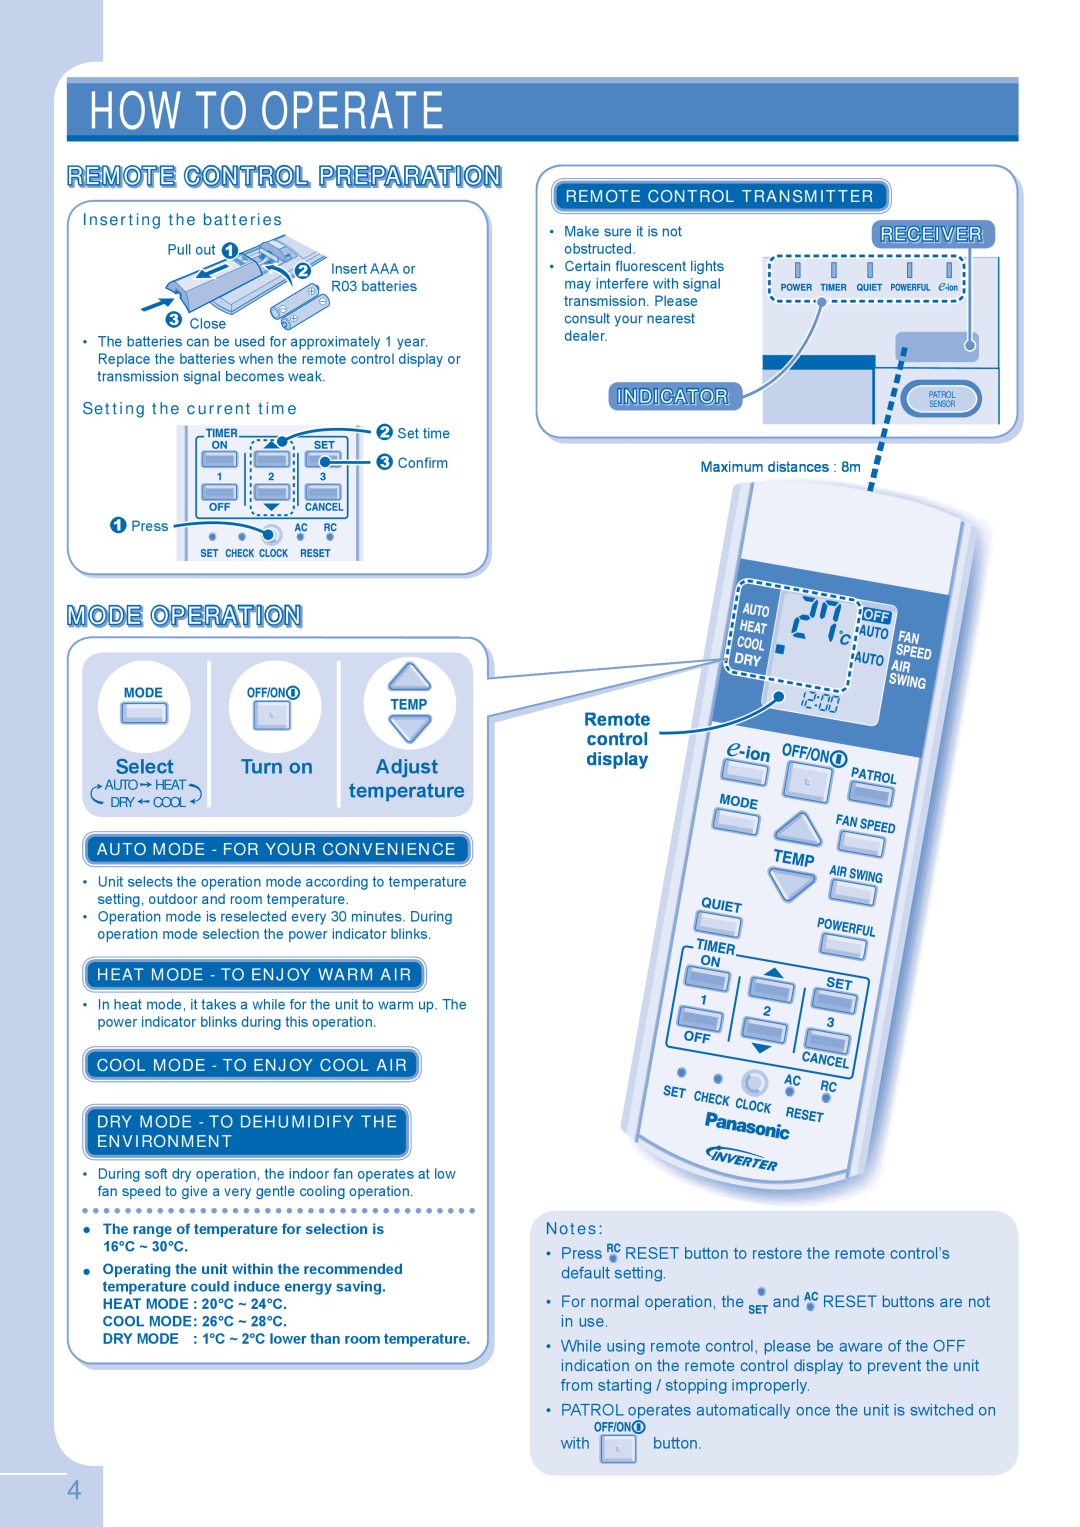 Panasonic CU-E12GKE Remote Control Preparation, Mode Operation, Select, Turn on, Adjust, How To Operate, Receiver 